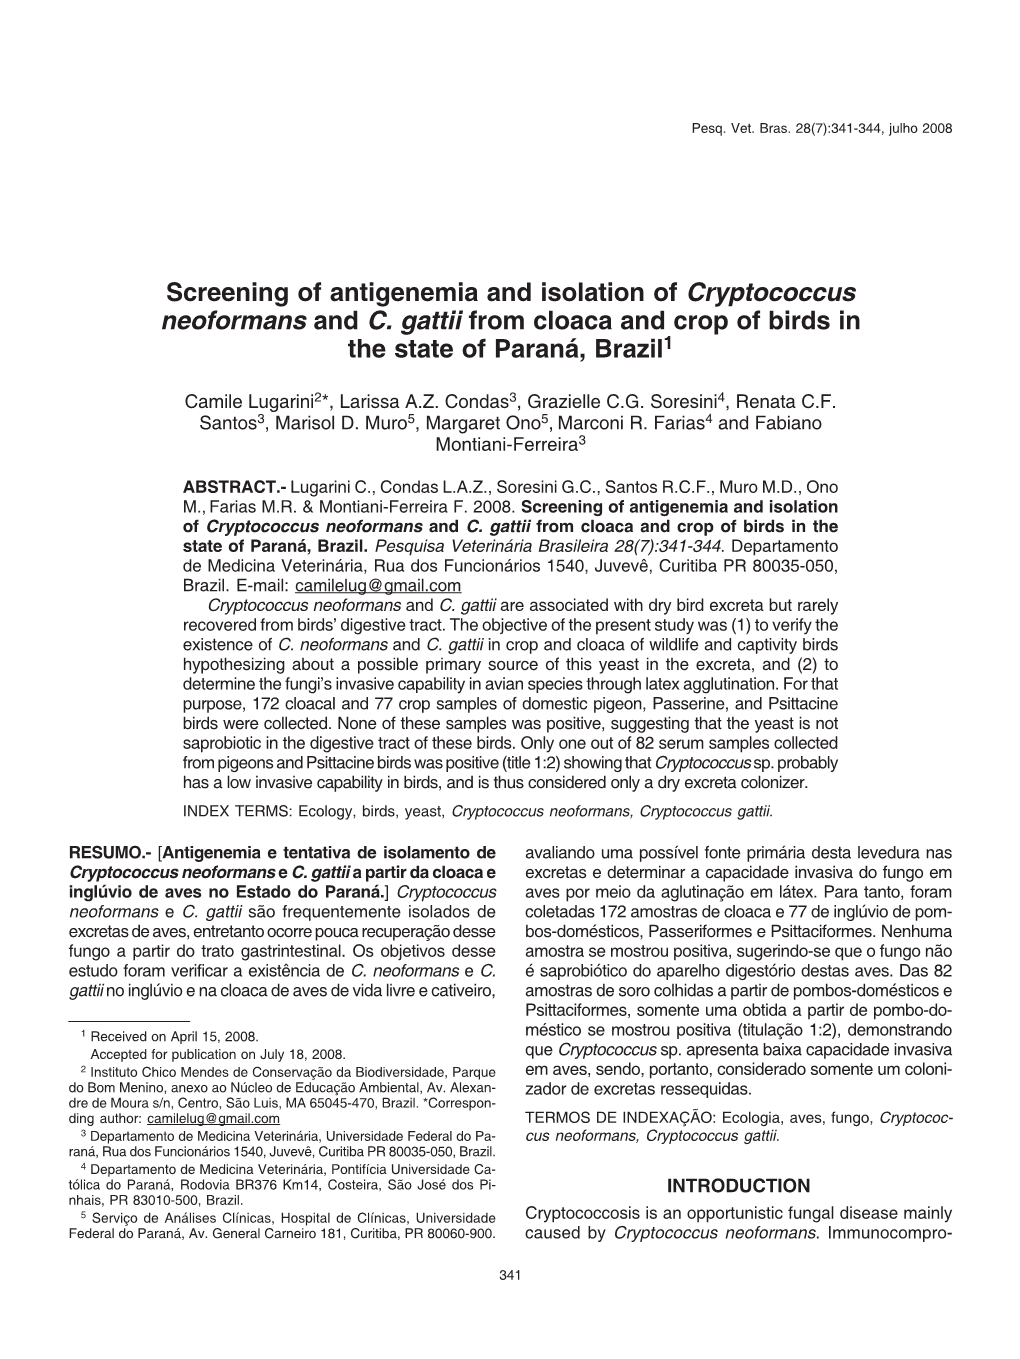 Screening of Antigenemia and Isolation of Cryptococcus Neoformans and C. Gattii from Cloaca and Crop of Birds in the State of Paraná, Brazil1